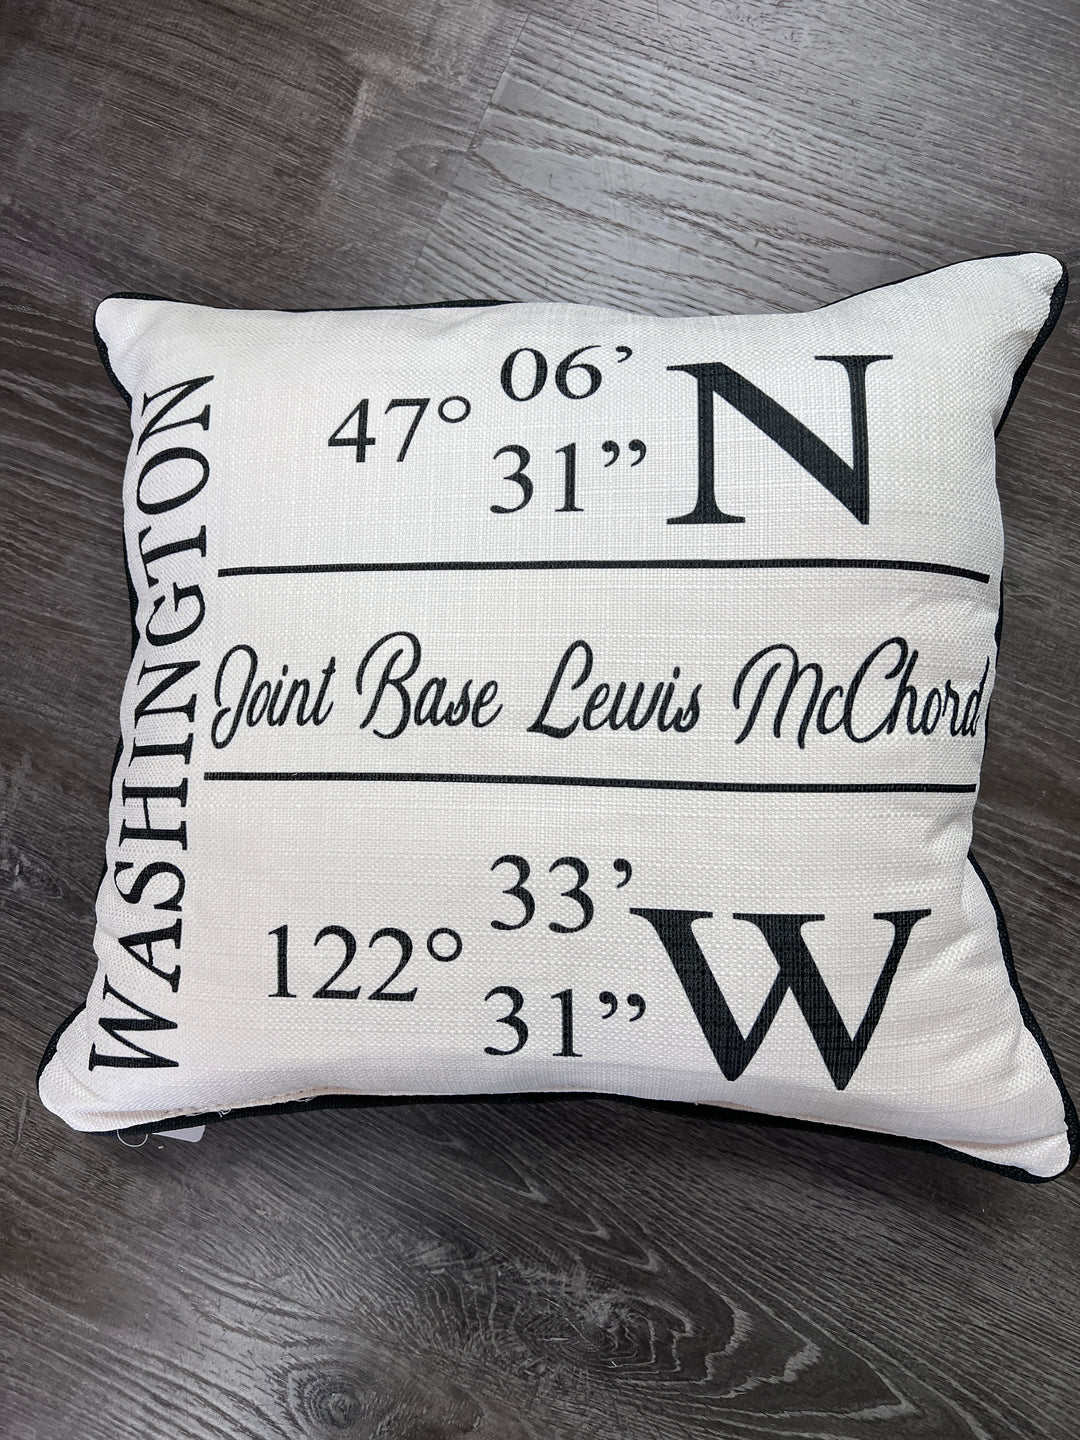 Square Coordinates Pillow- Joint Base Lewis McChord